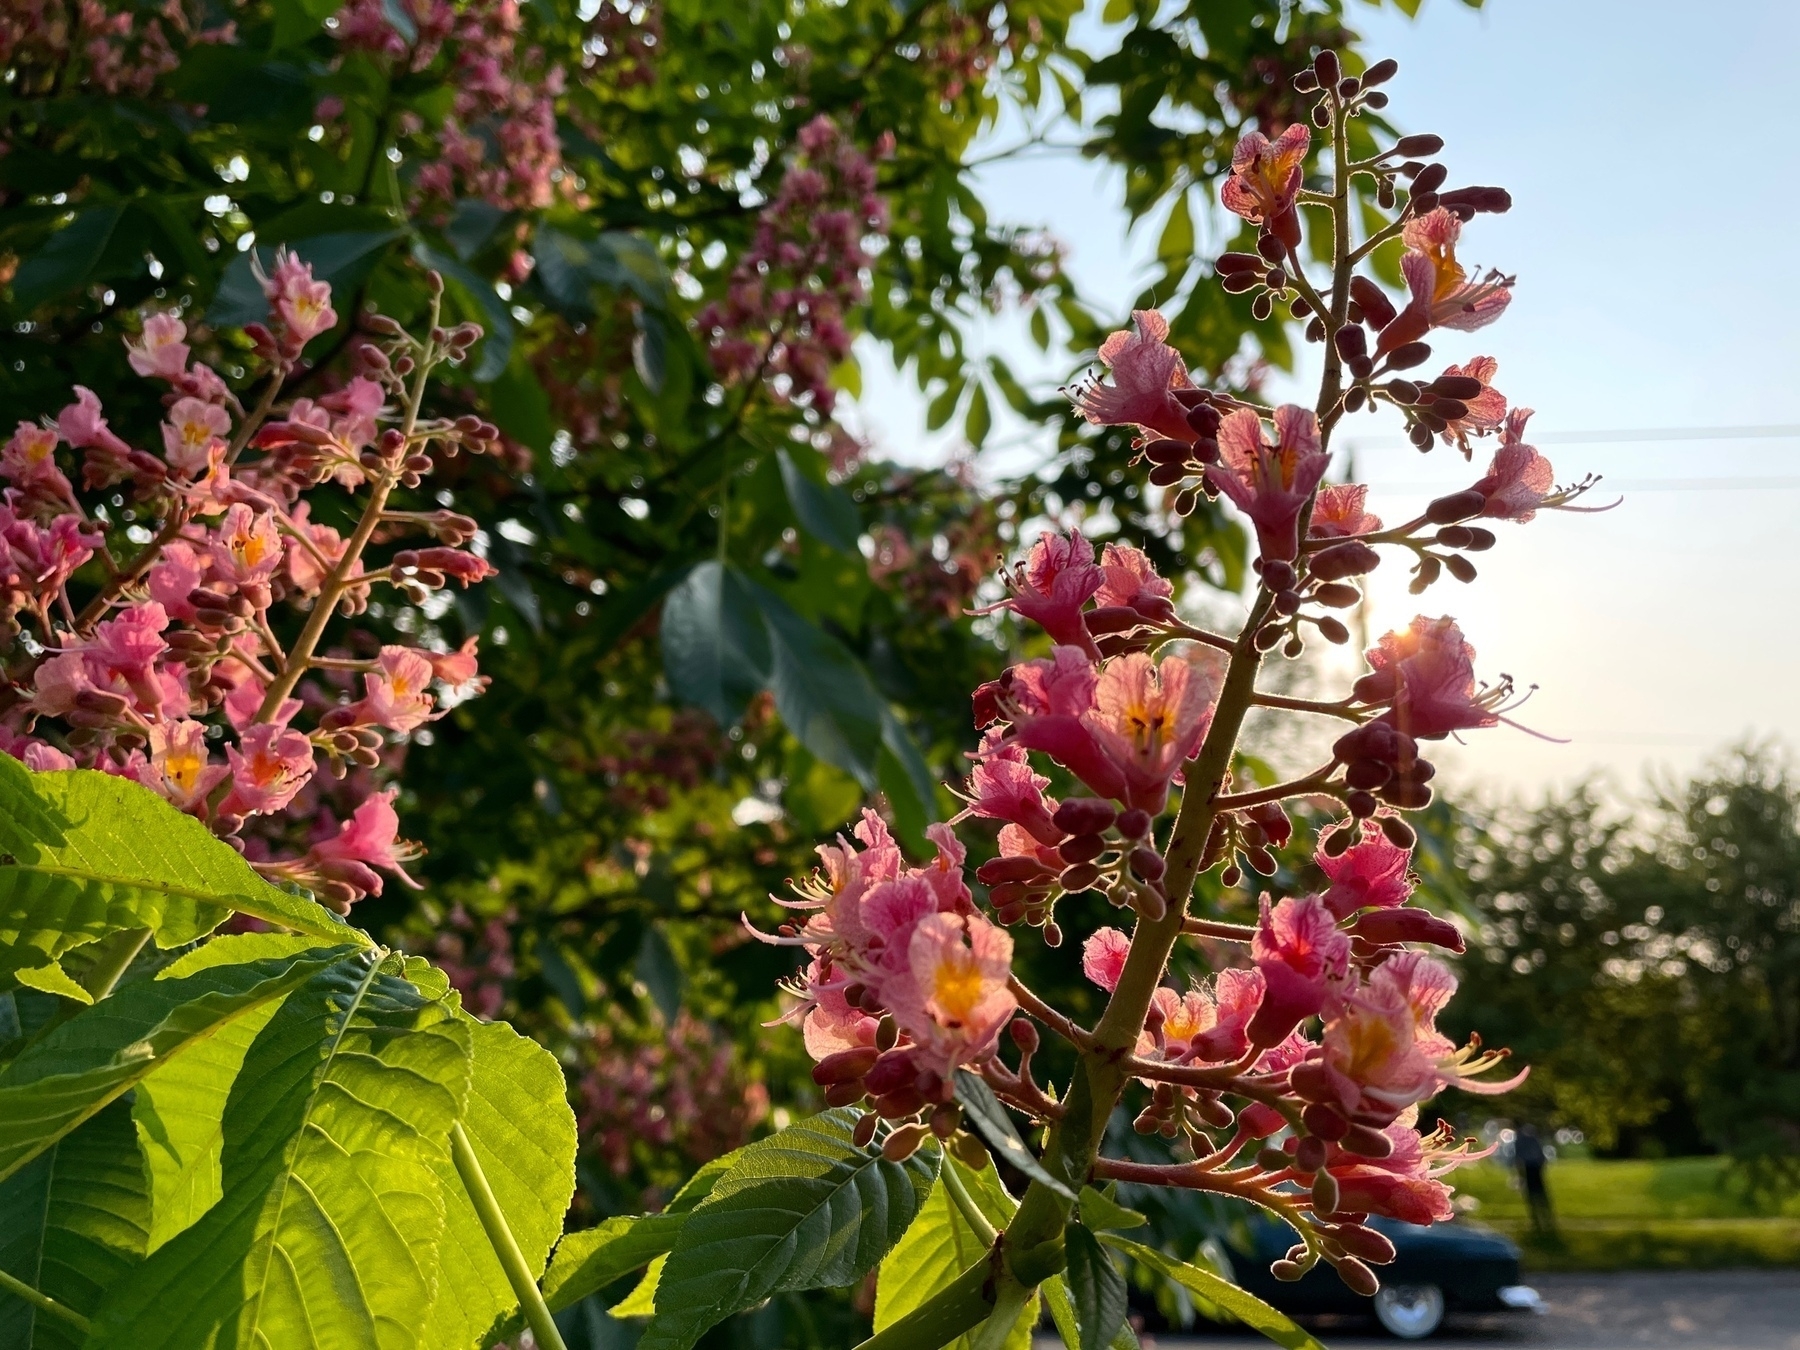 pink blossoms covering a tree branch in golden afternoon sun